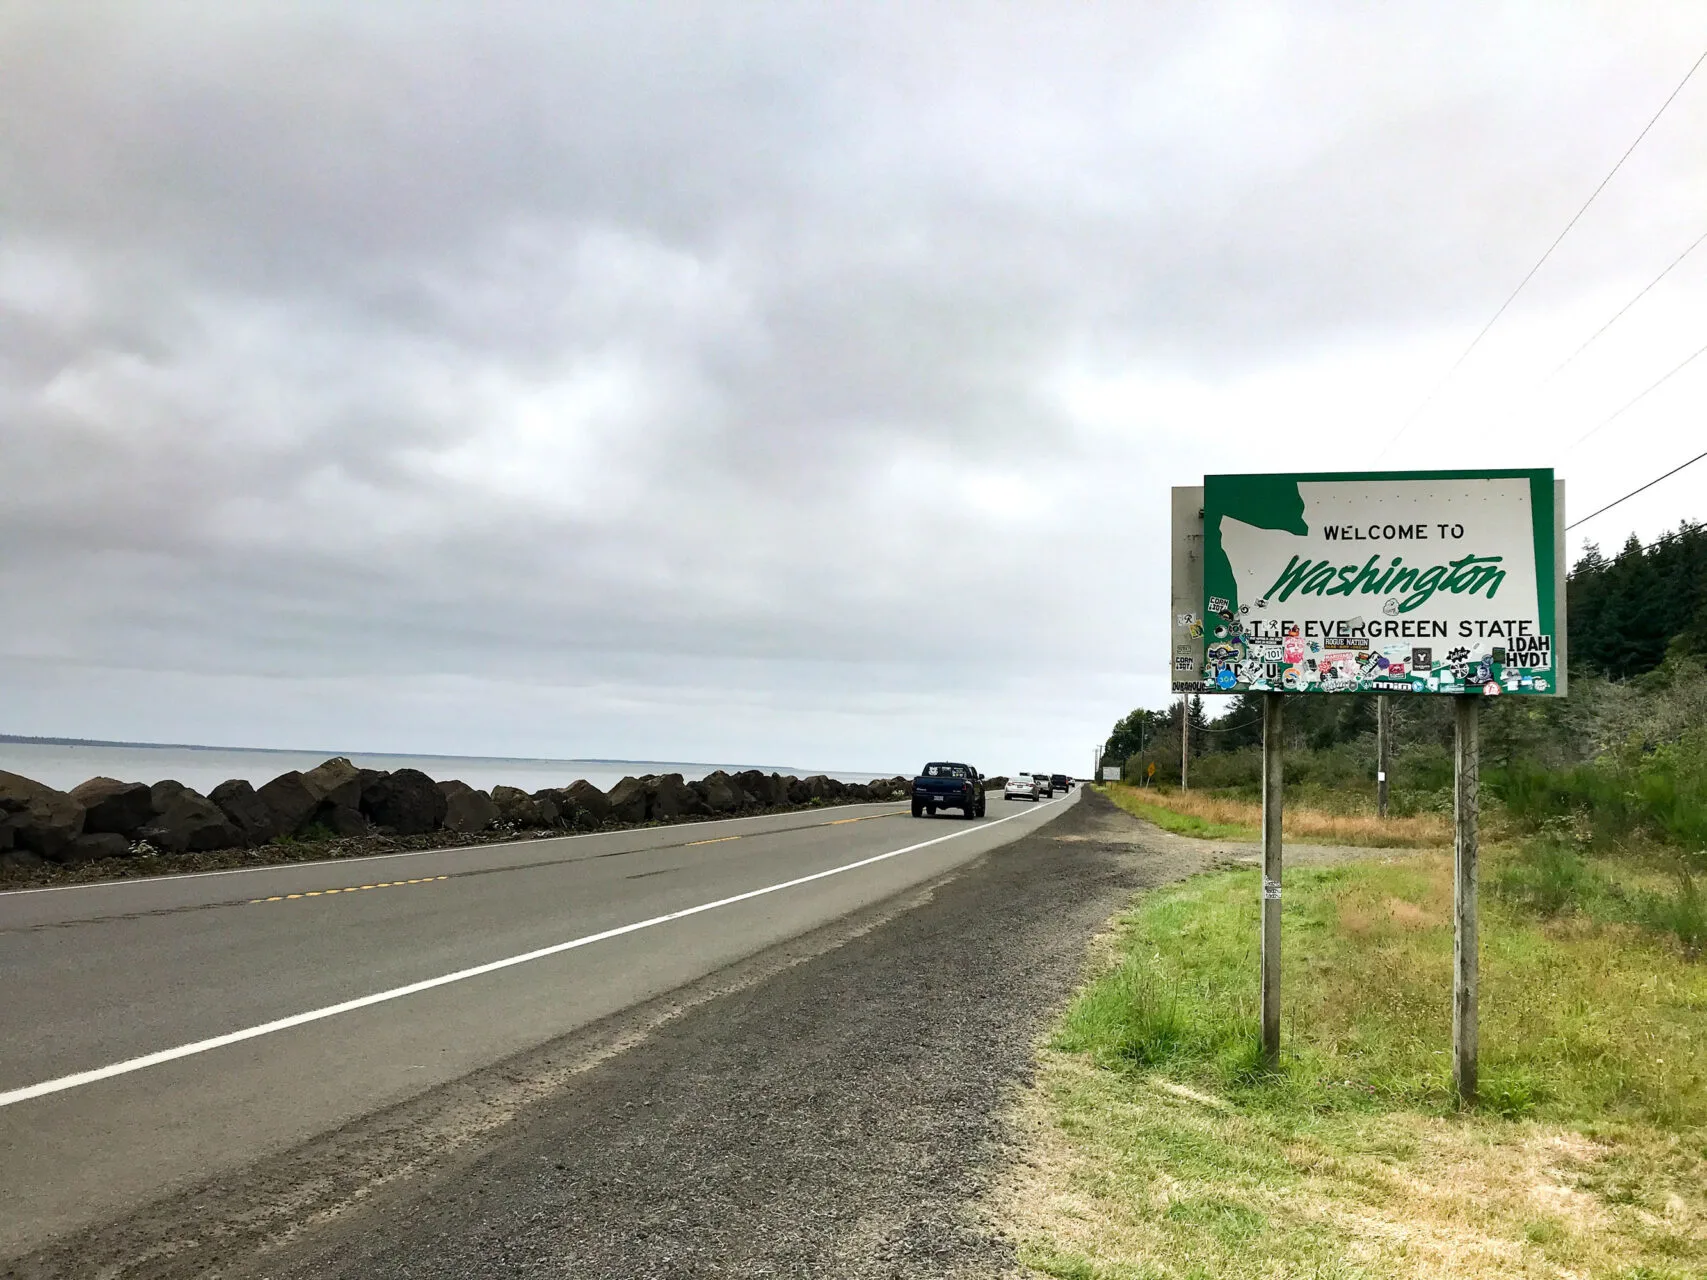 The Washington Welcome sign in Pacific Highway 1.